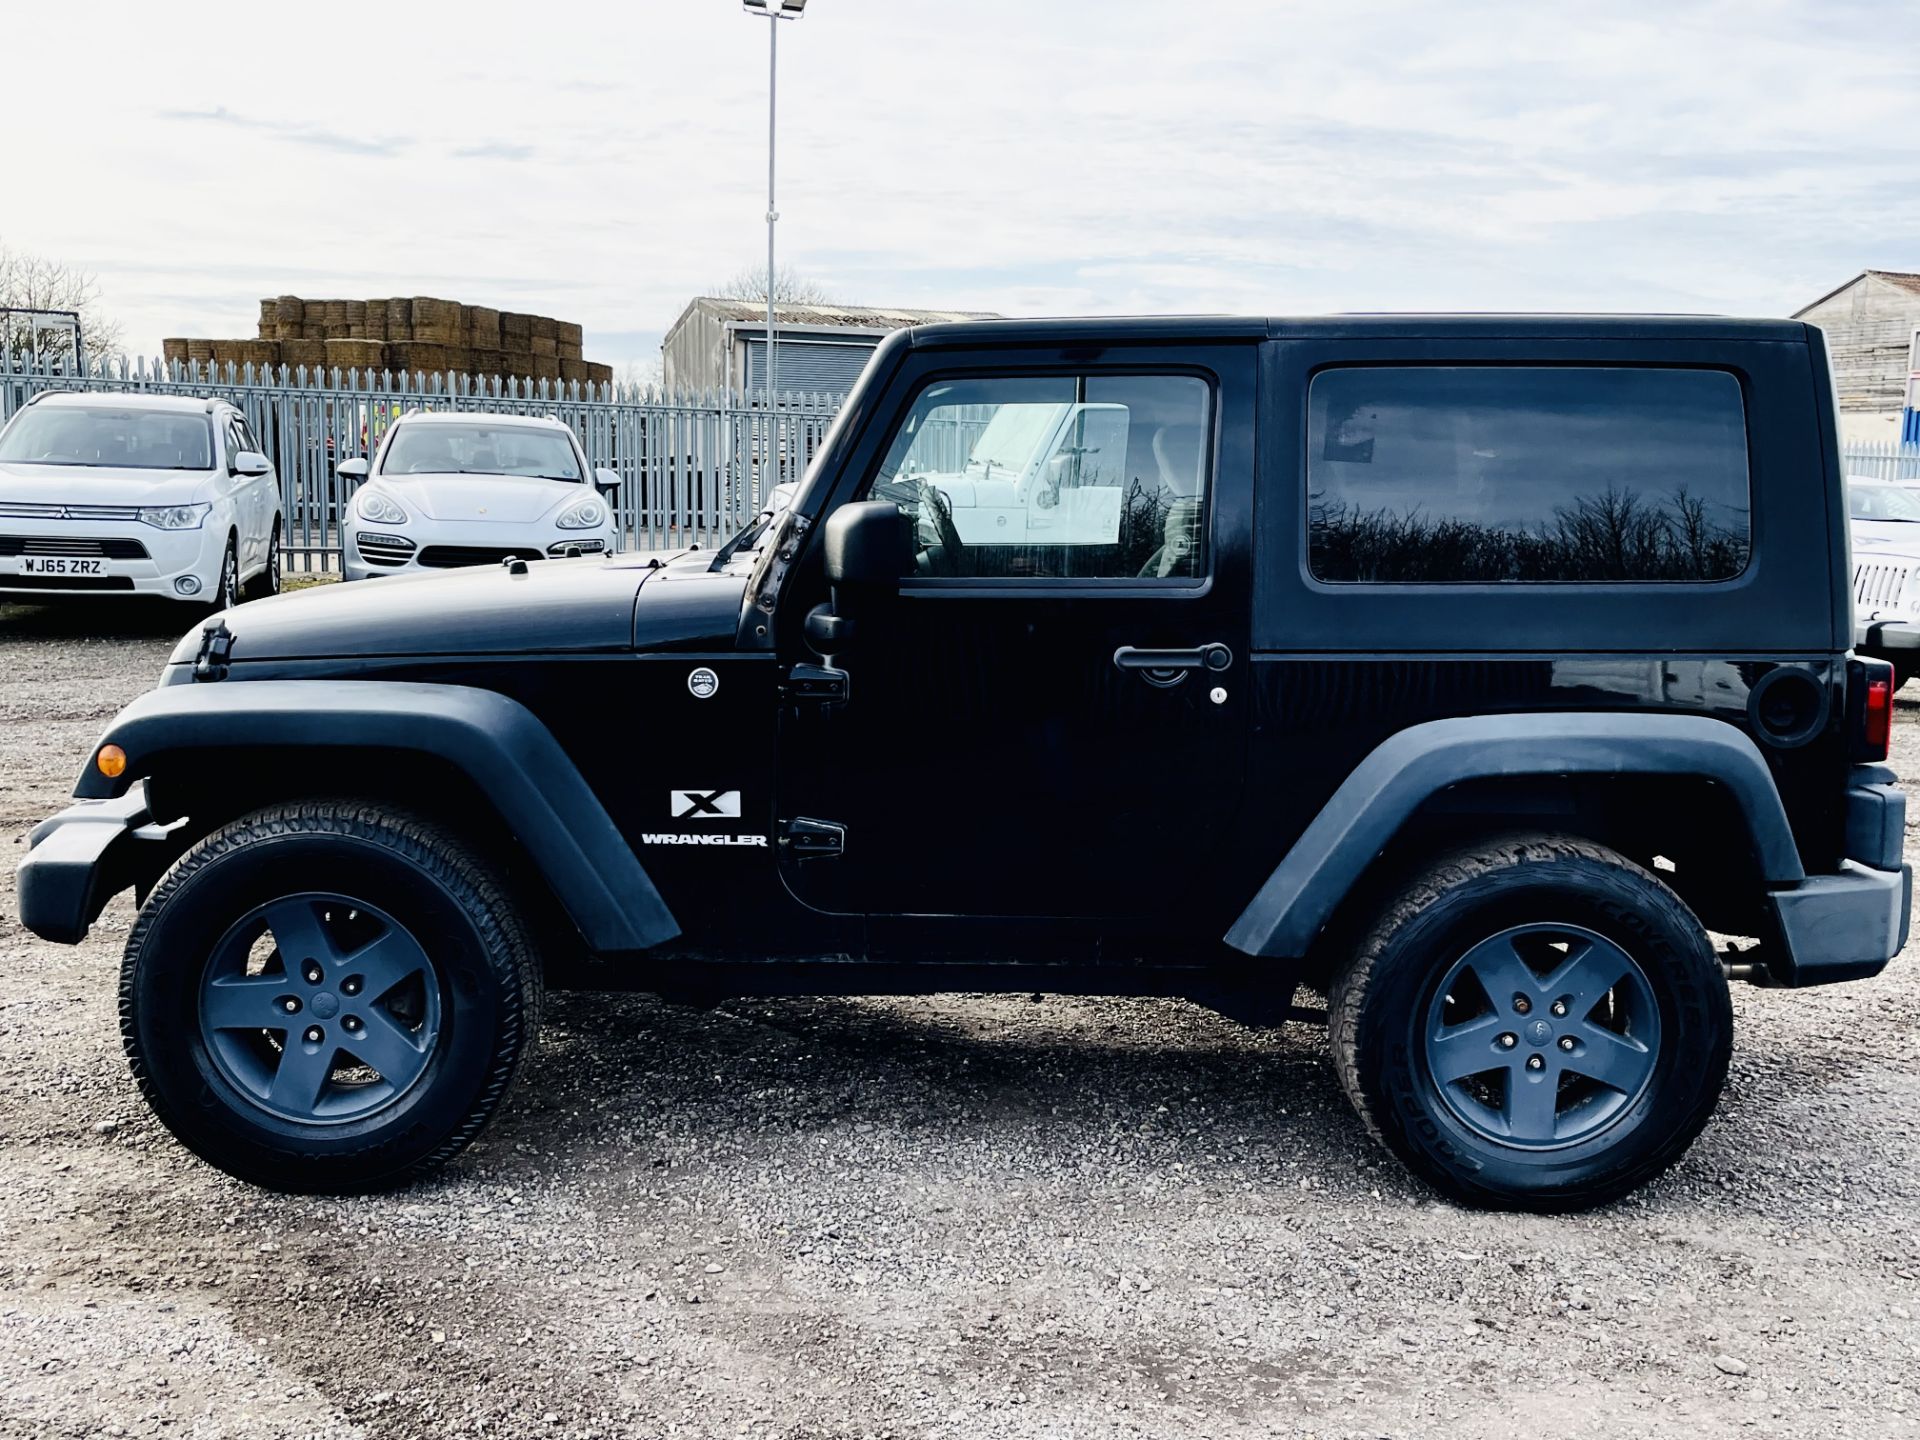 Jeep Wrangler 3.8L V6 4WD X '6 Speed Manual' '2009 Year' Convertible Hardtop - ULEZ Compliant - Image 9 of 21